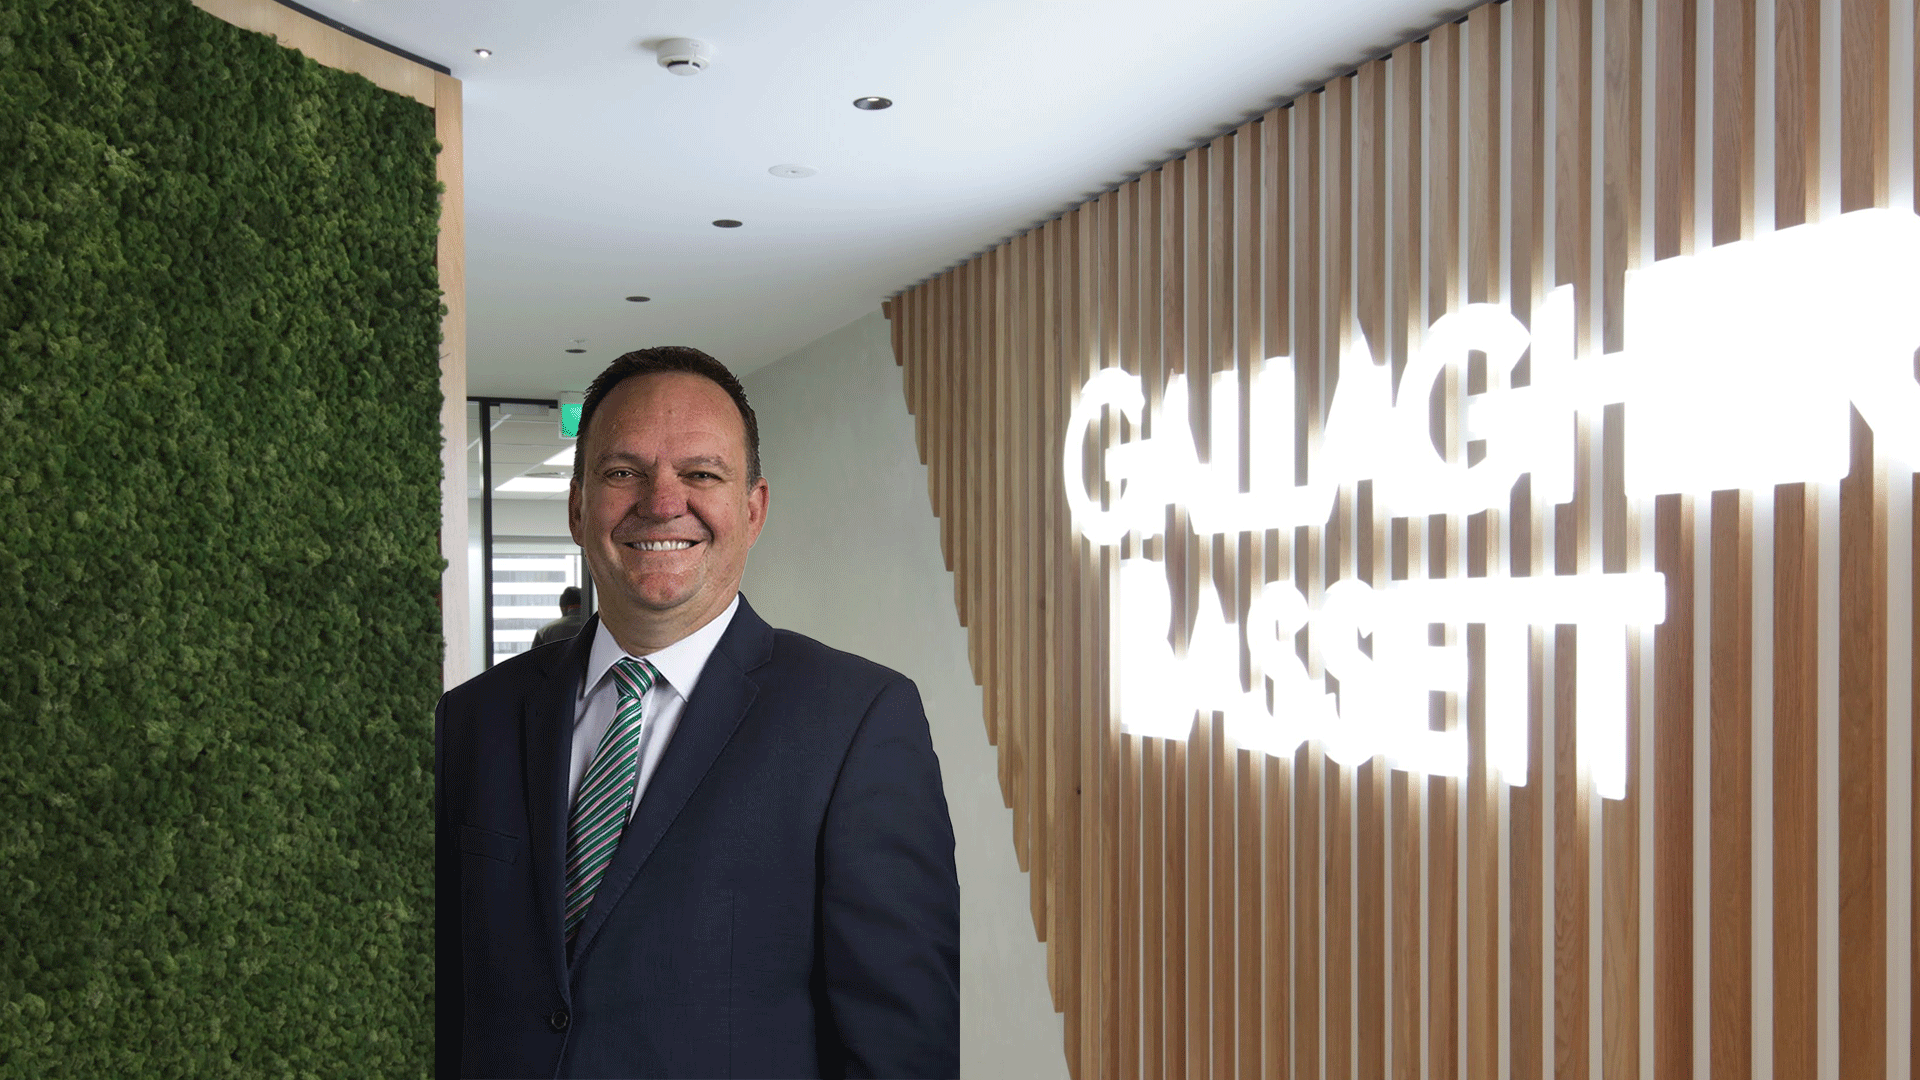 Gallagher Basset's partnership focus drives outcomes